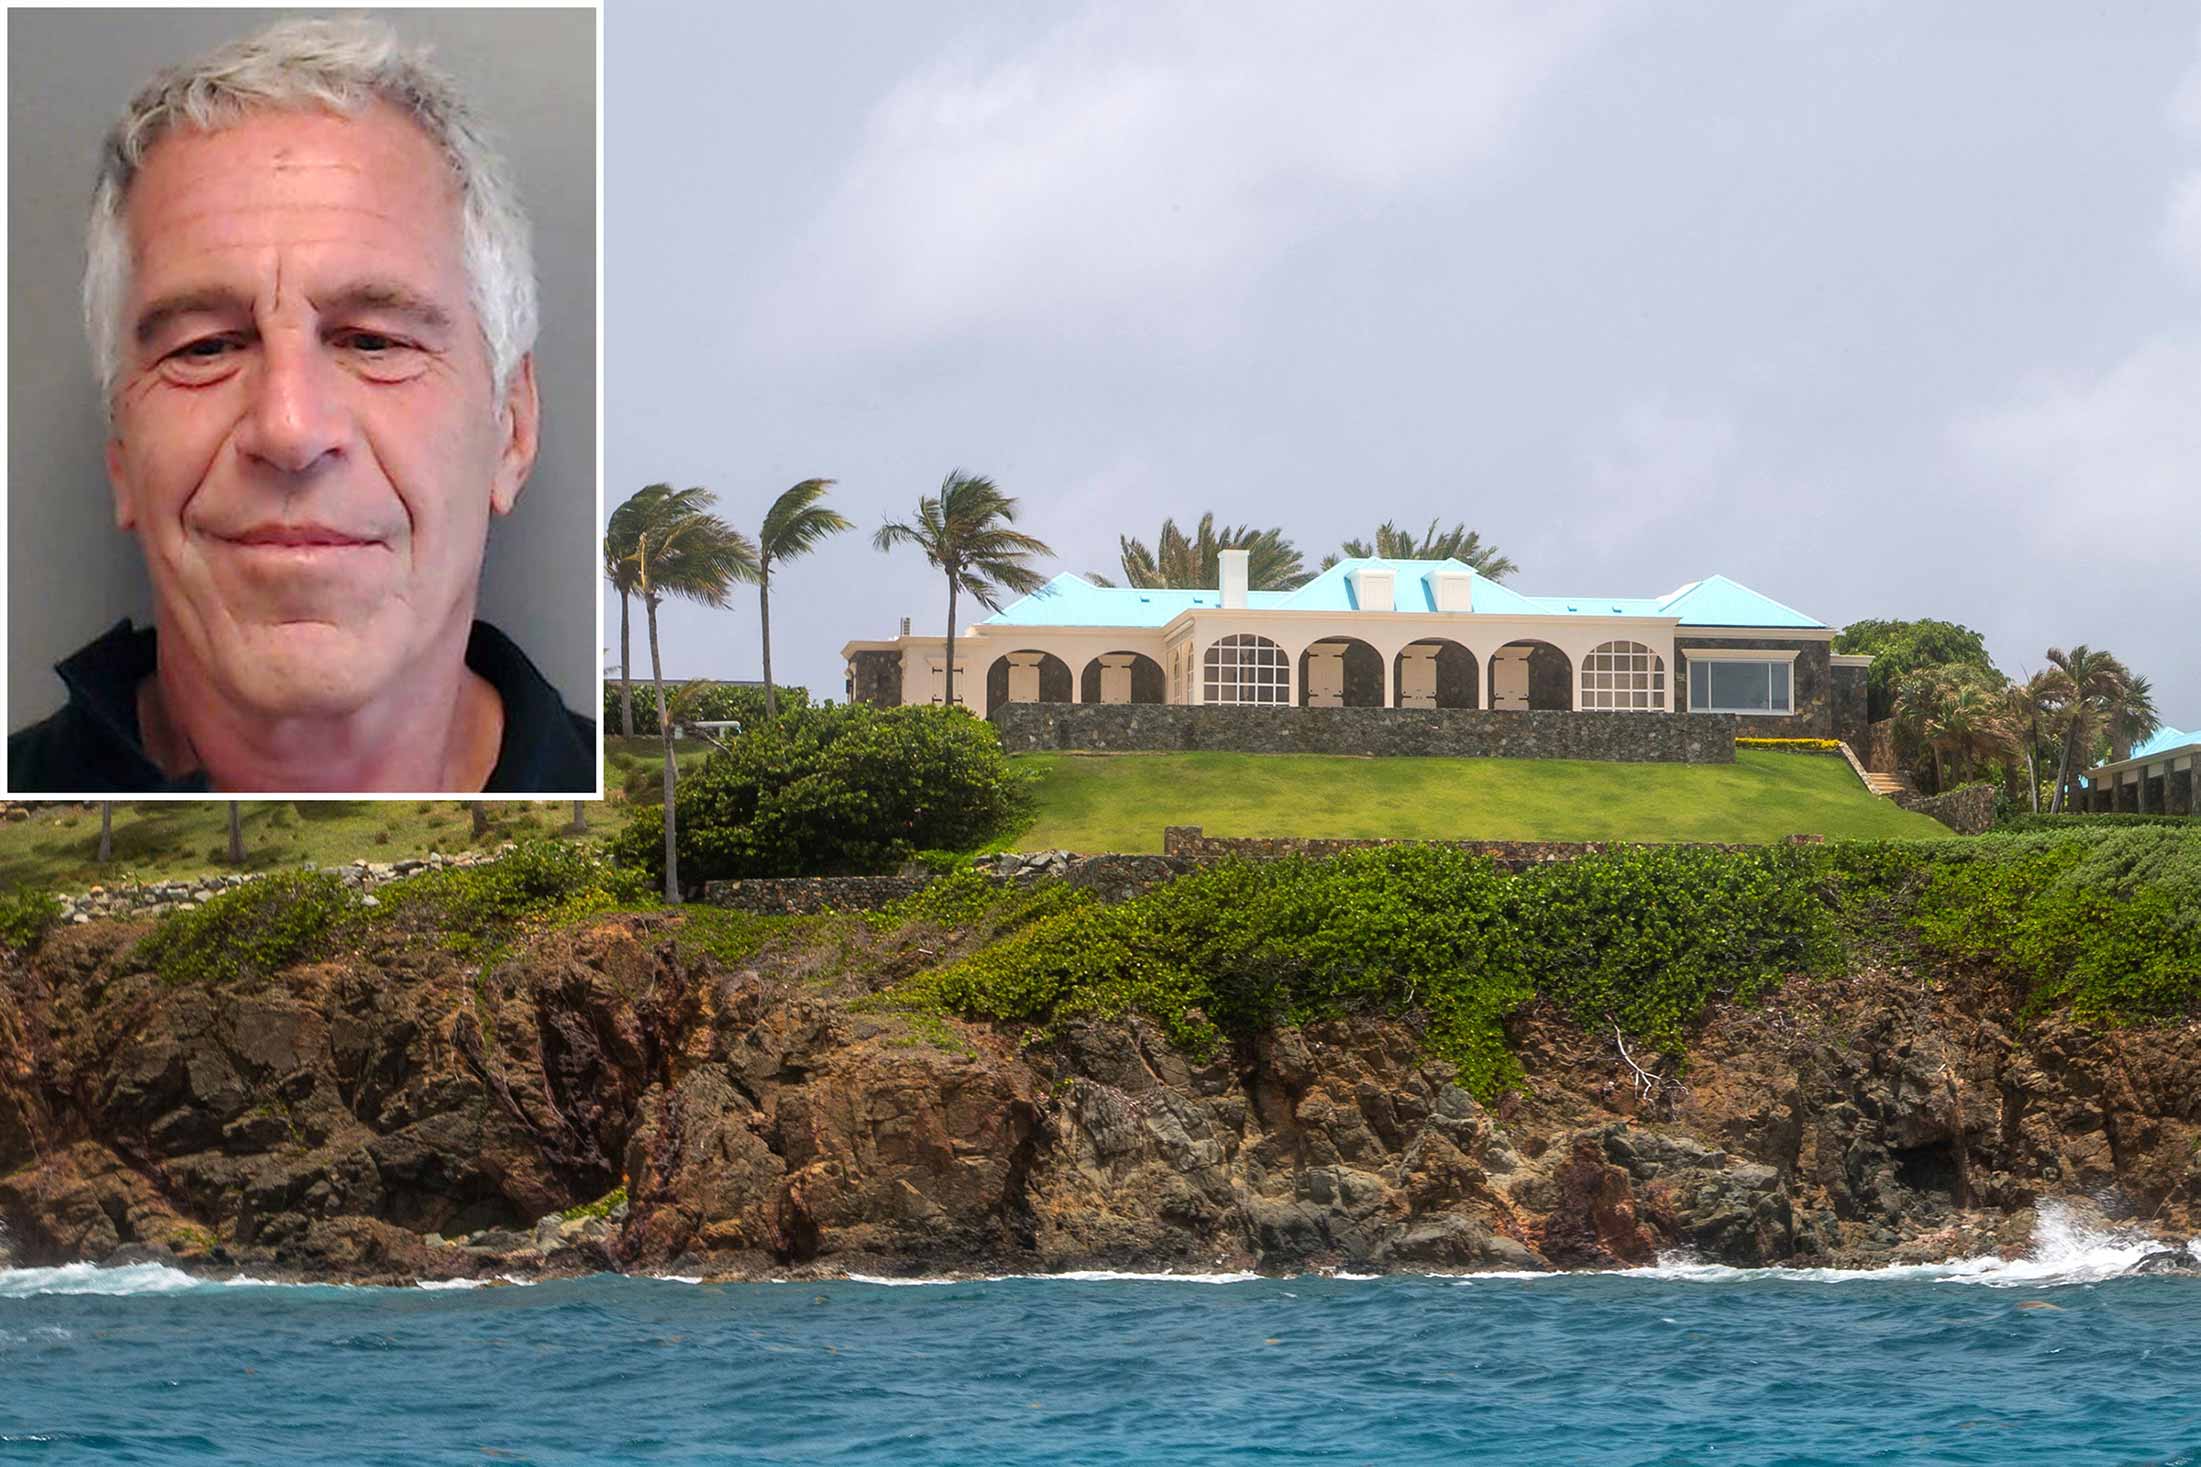 The craziest information about Jeffrey Epstein and his private island